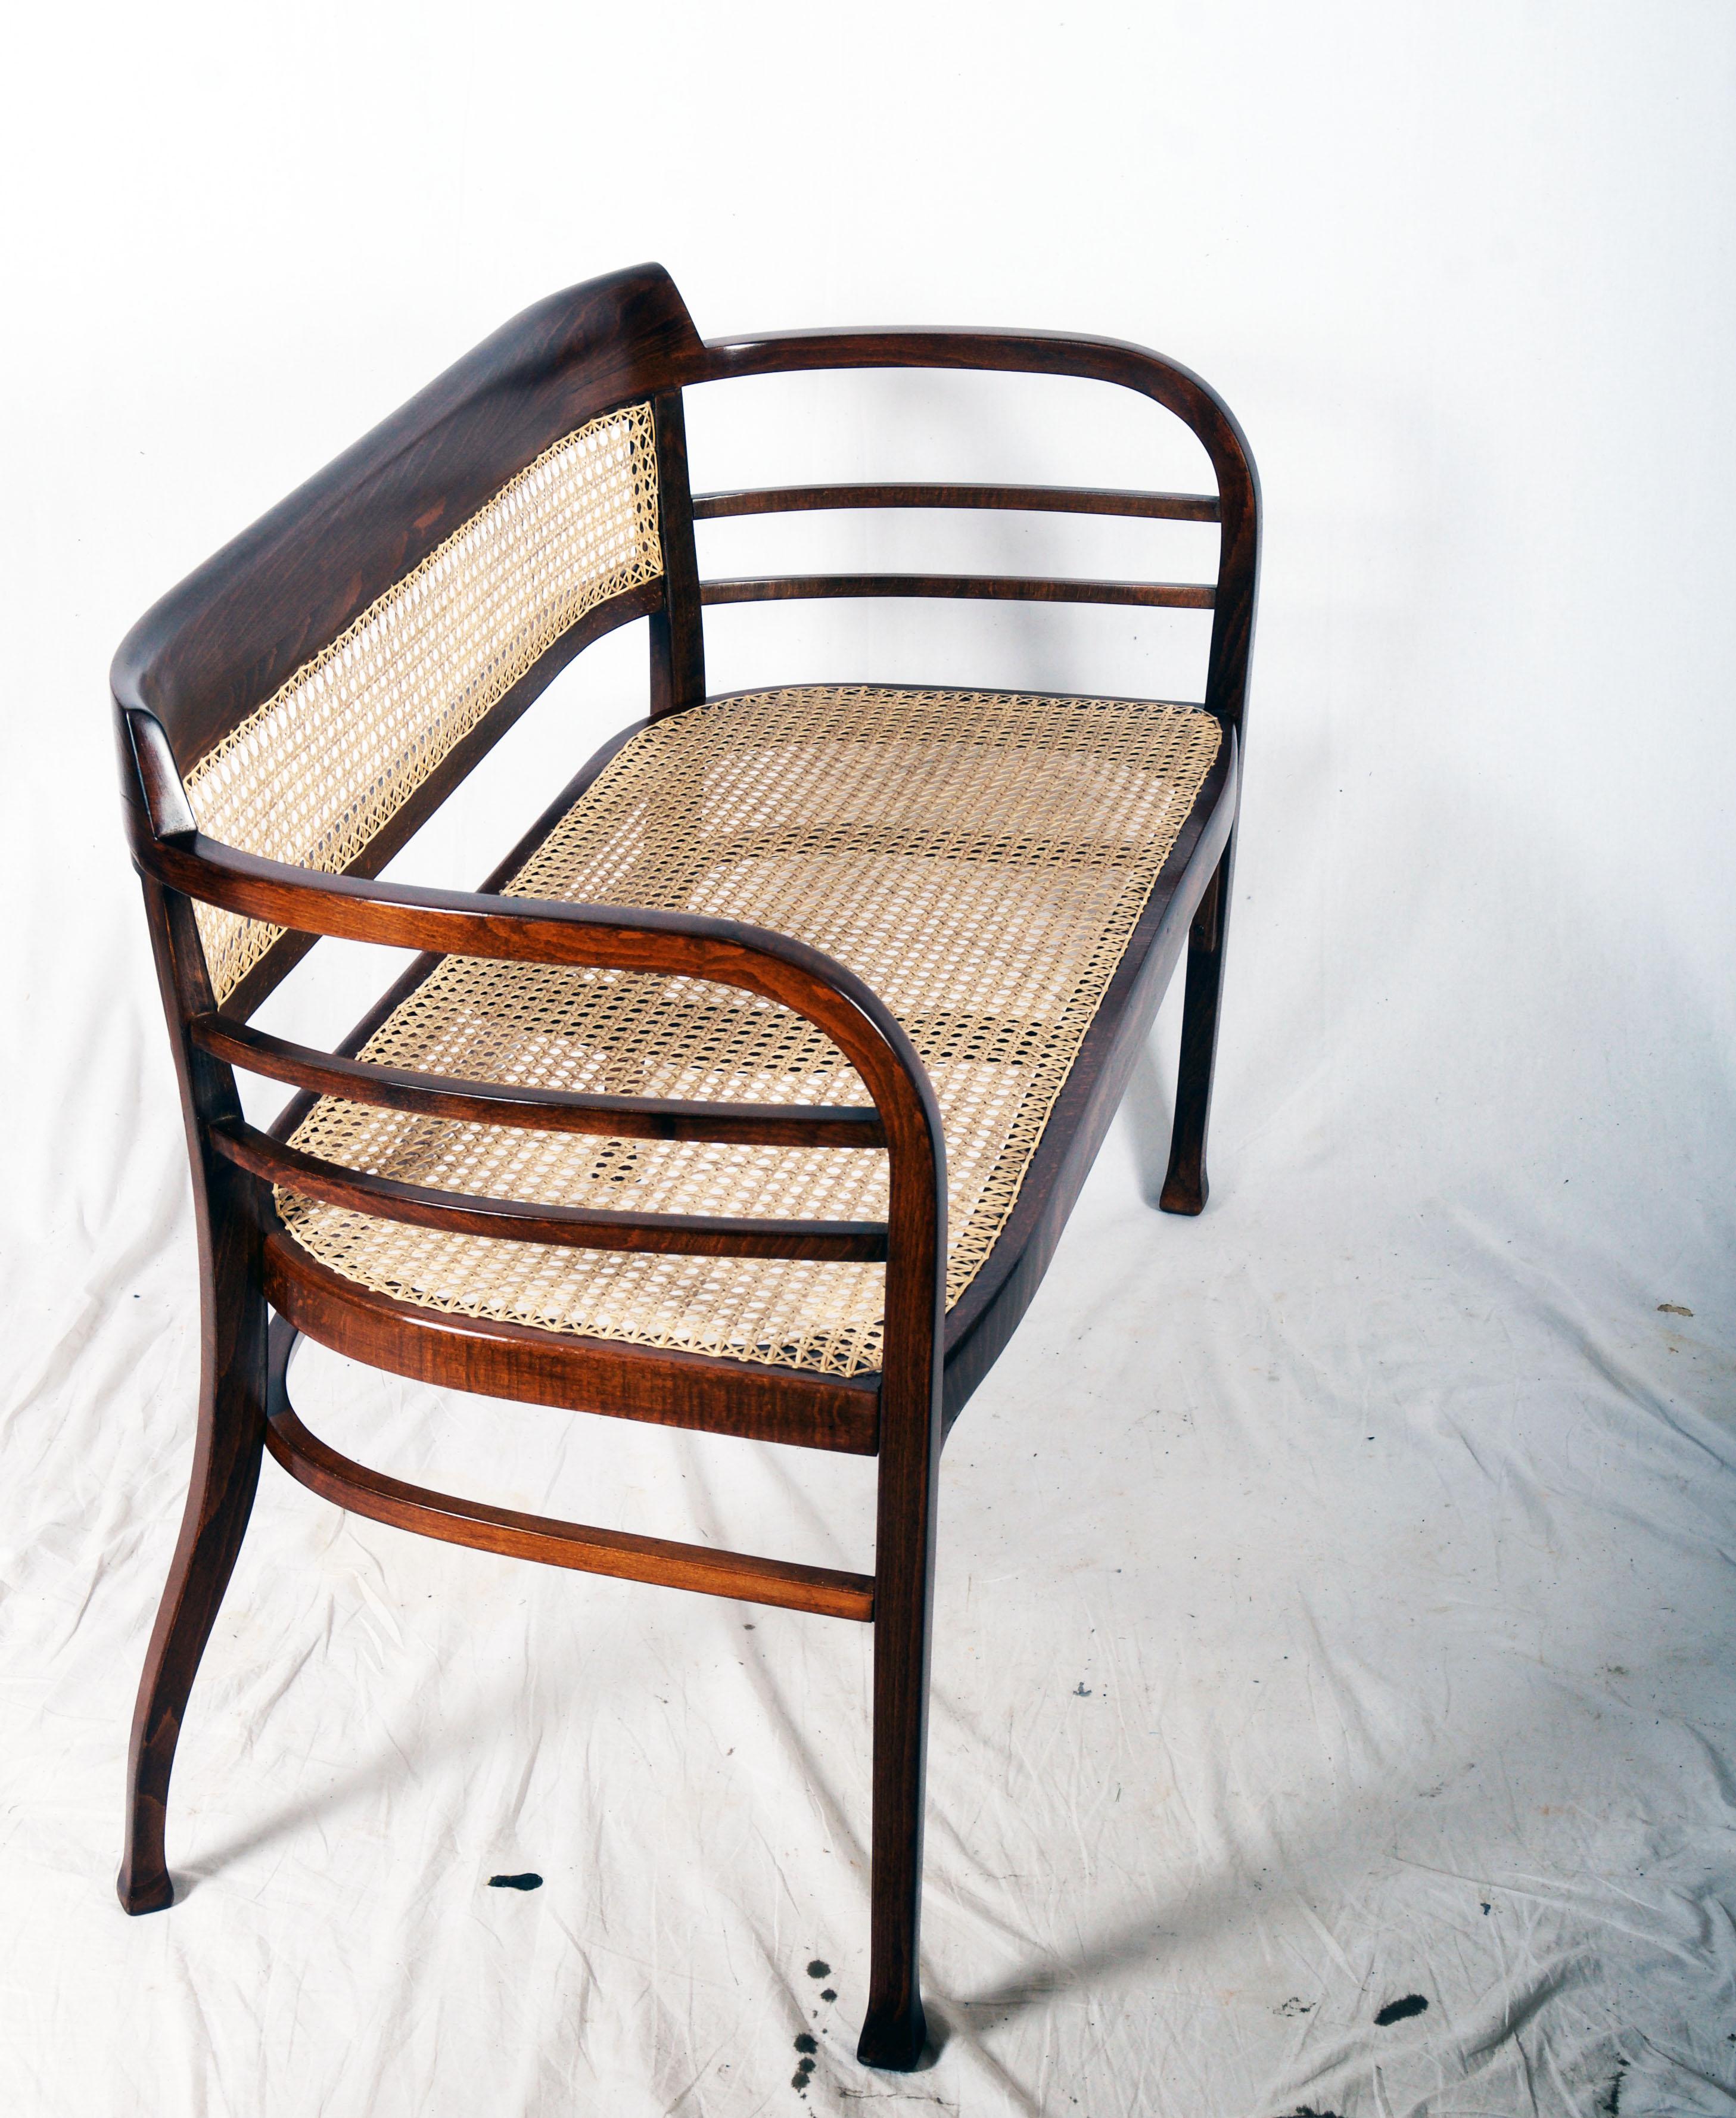 Thonet Bench Attributed to Otto Wagner 1